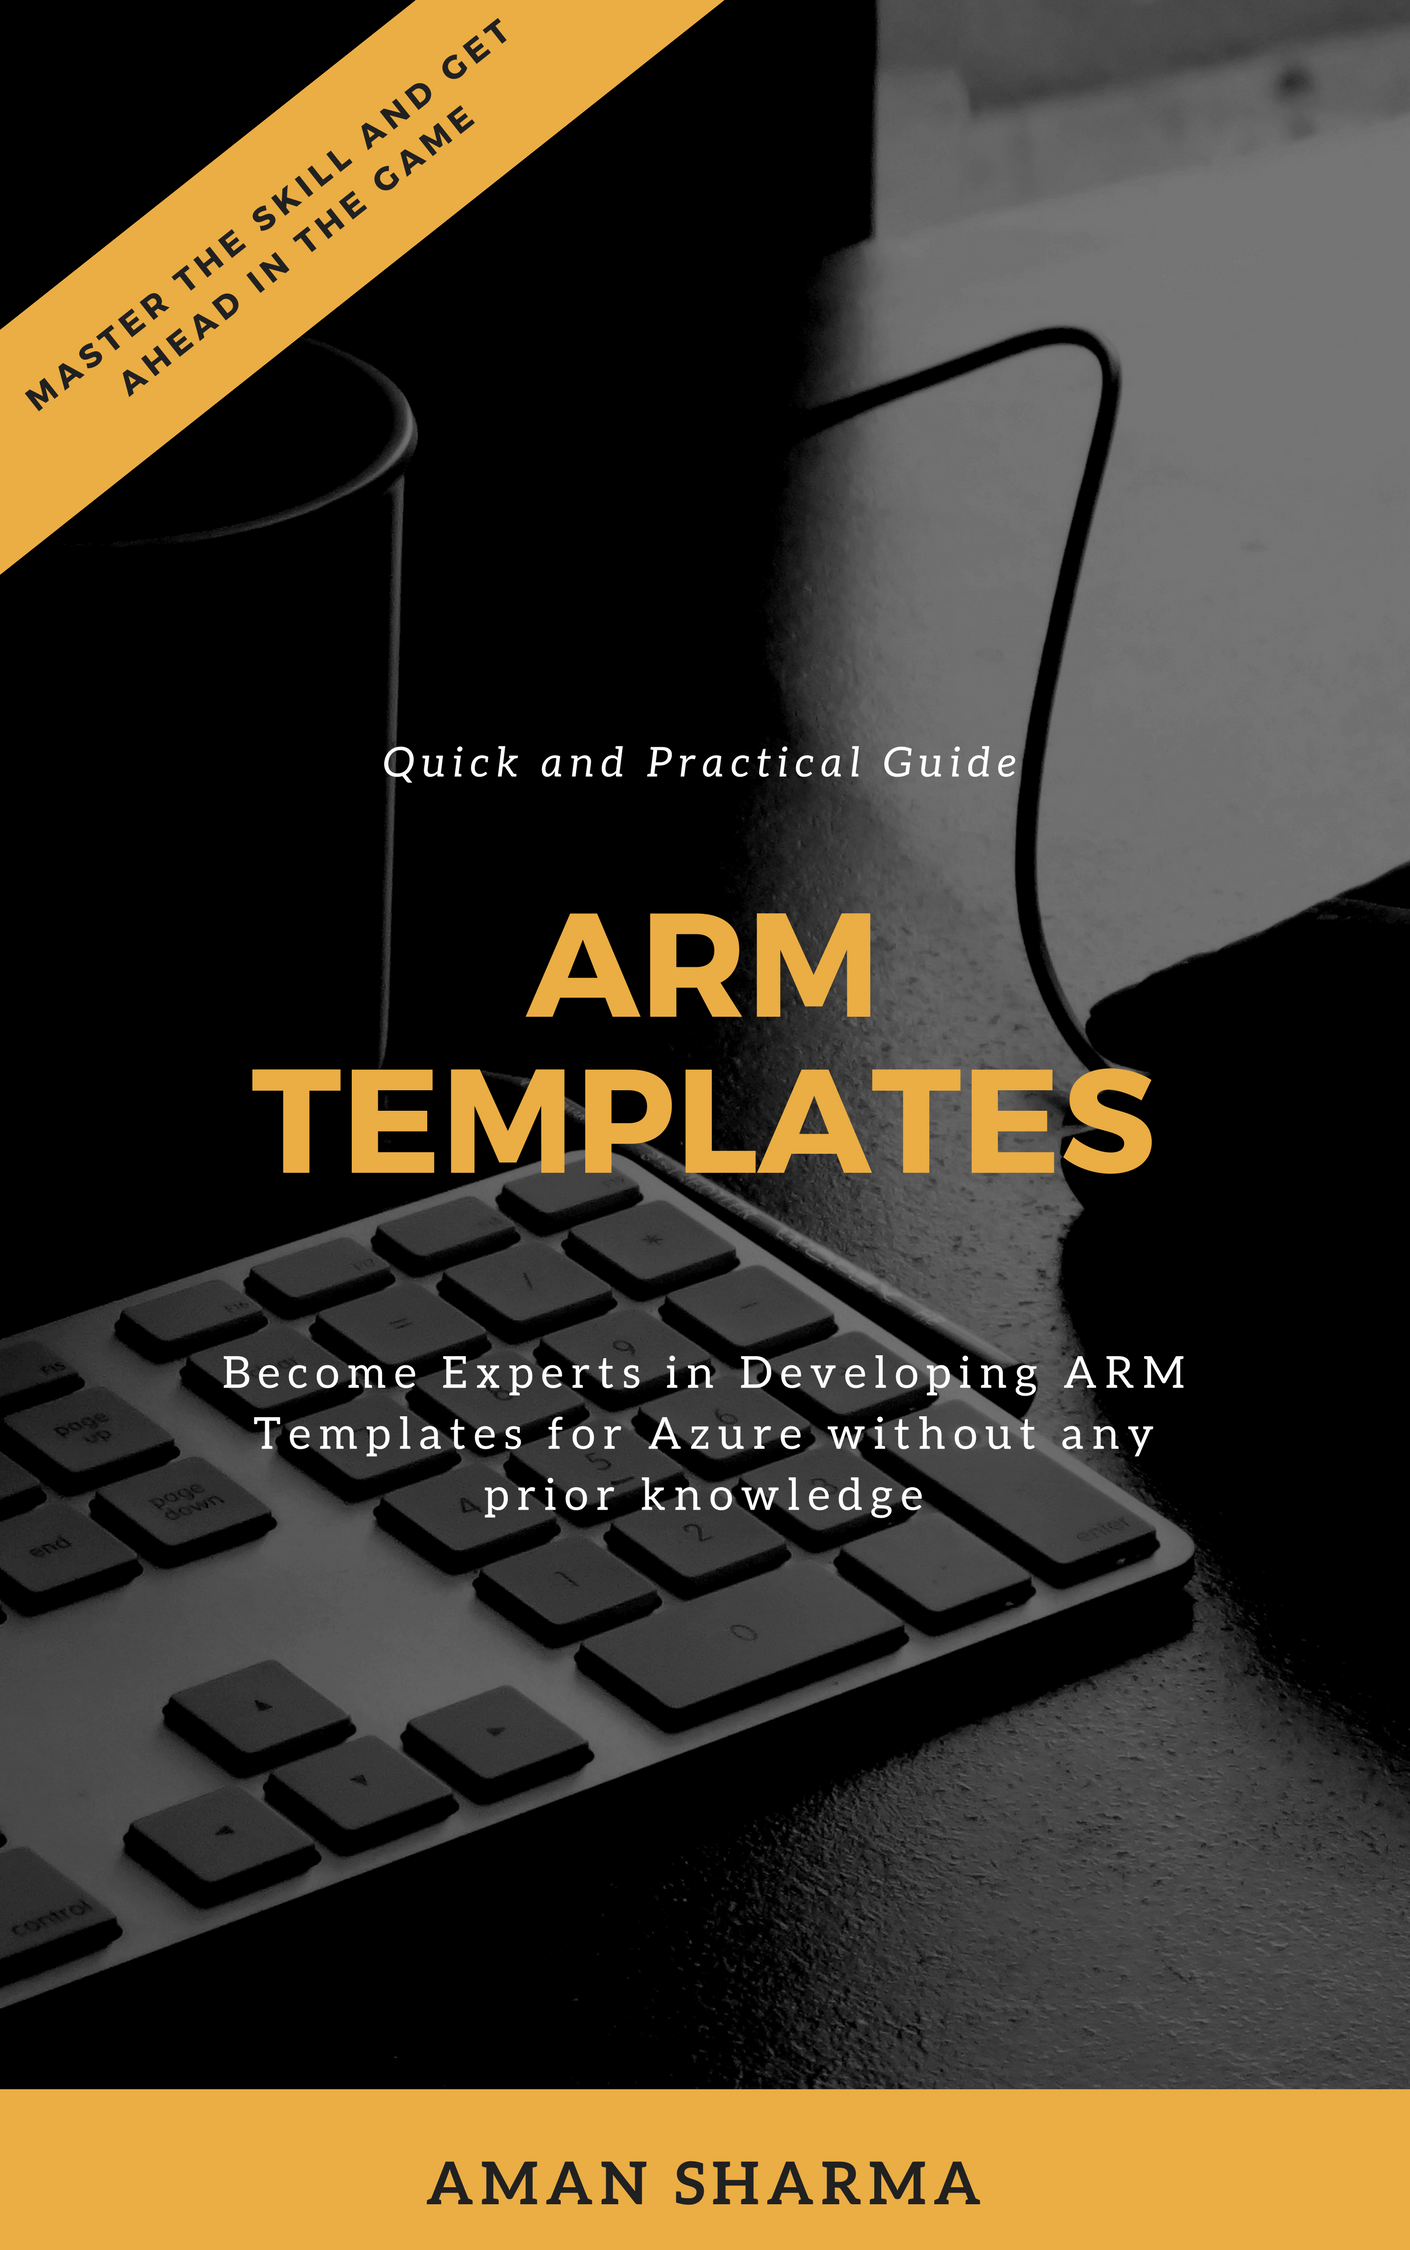 Quick and Practical Guide to ARM Templates